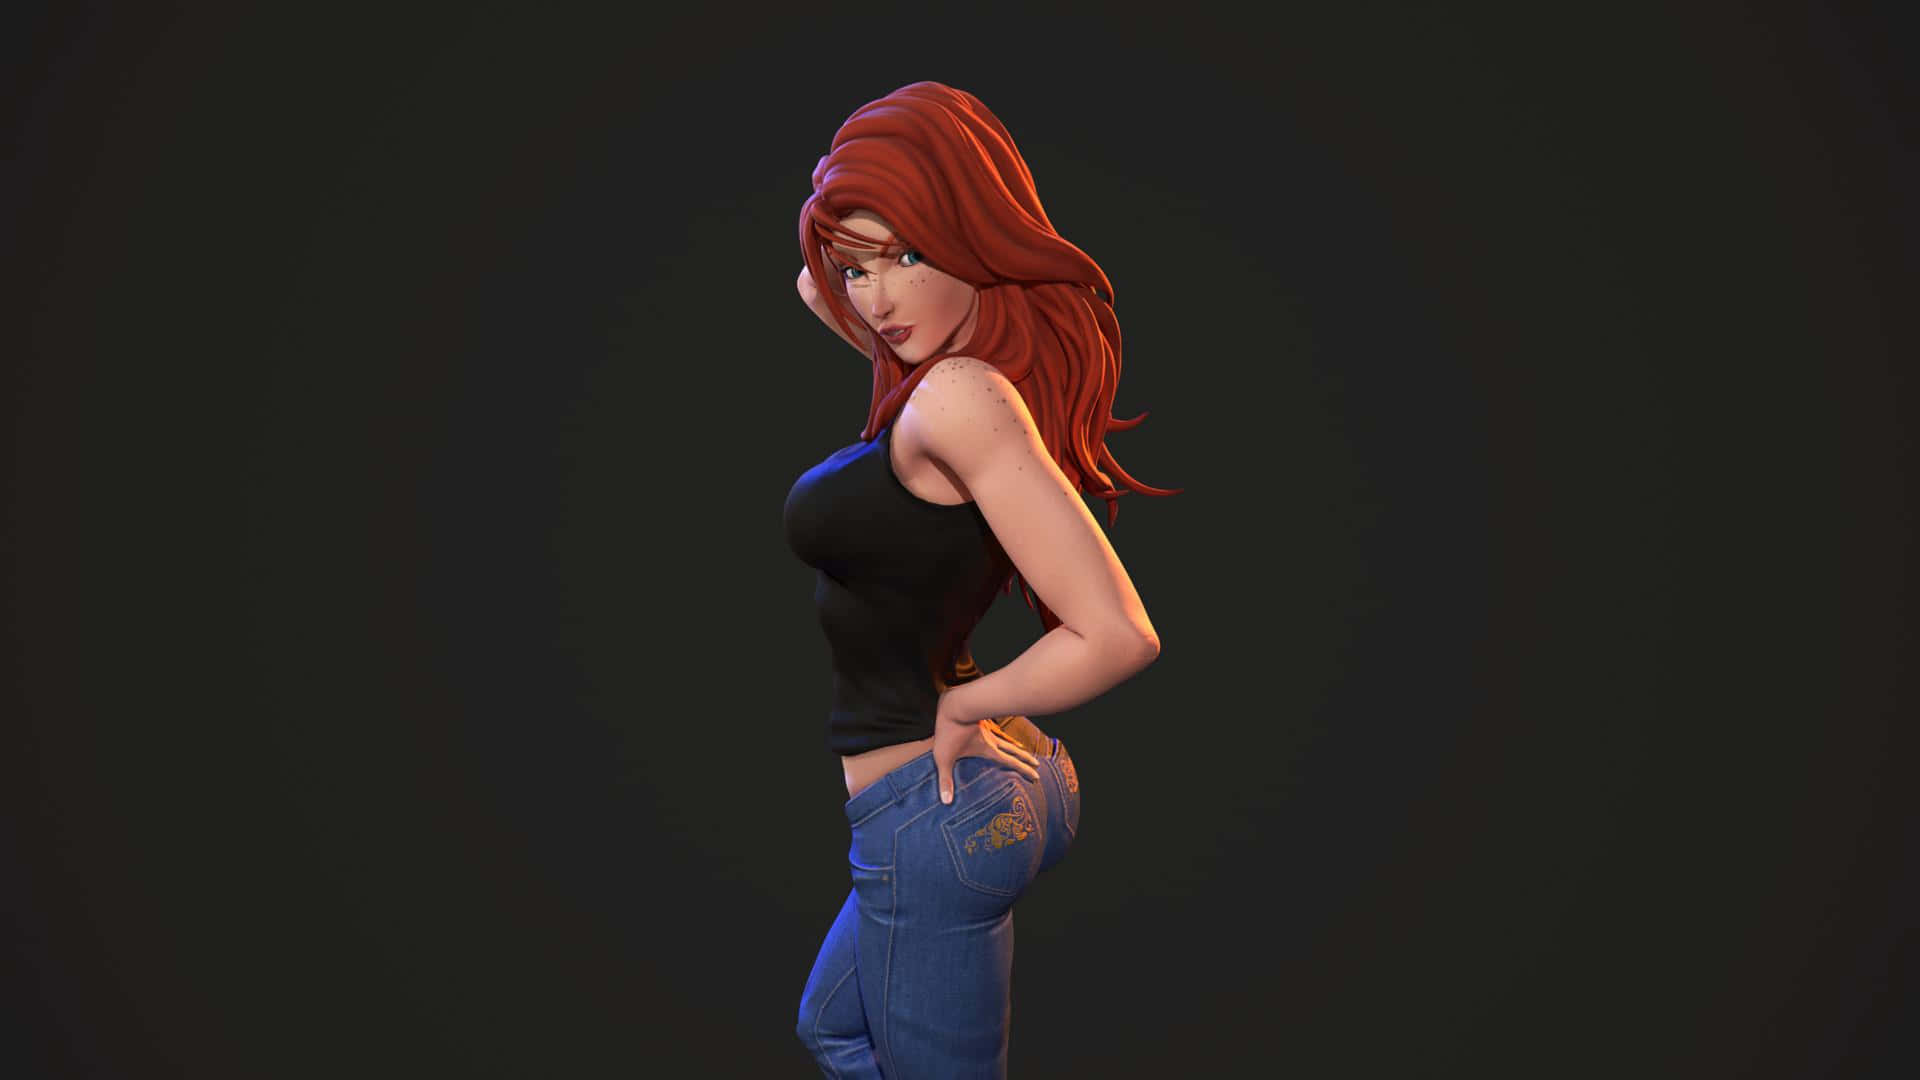 Energetic Mary Jane enacting an iconic pose Wallpaper